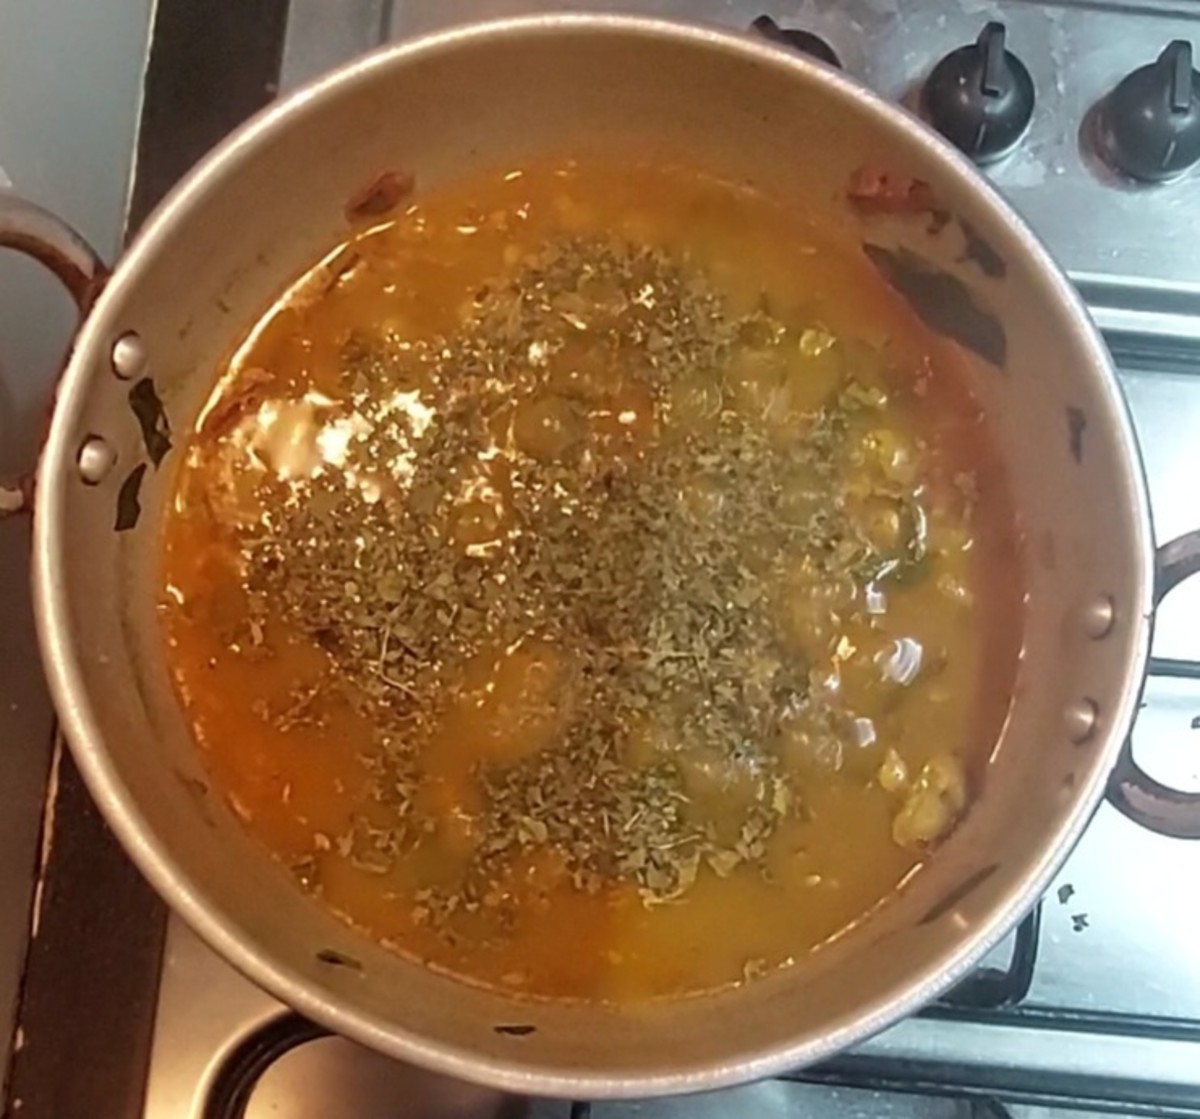 Mix well, adjsut salt. Close the lid and cook for 5 minutes. Add 1 teaspoon crushed kasuri methi and 1 teaspoon ghee for extra flavor. Mix well.